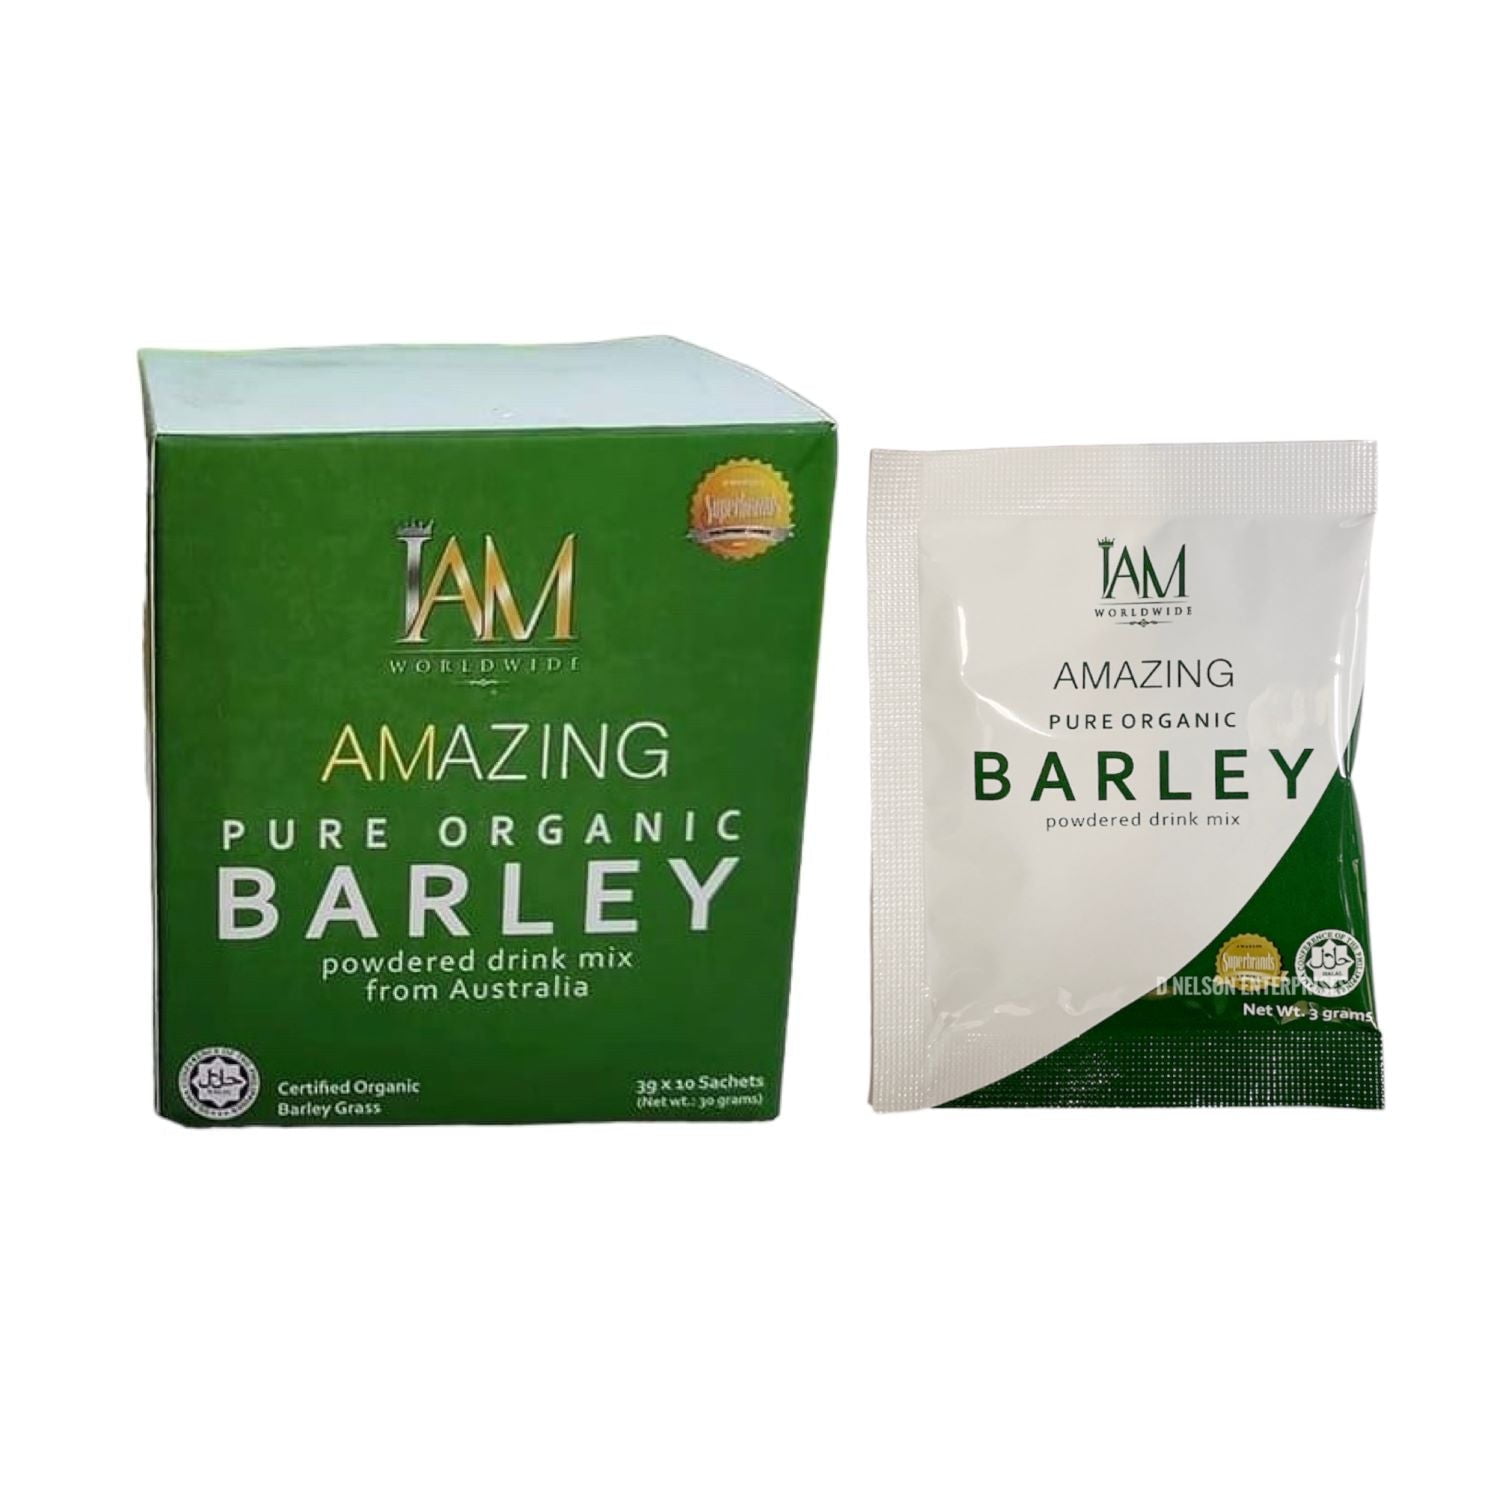 Buy lohastyle Super Barley Barley Max (800g x 6 bags) Resistant Starch  [Twice the total dietary fiber content of glutinous barley] from Japan -  Buy authentic Plus exclusive items from Japan